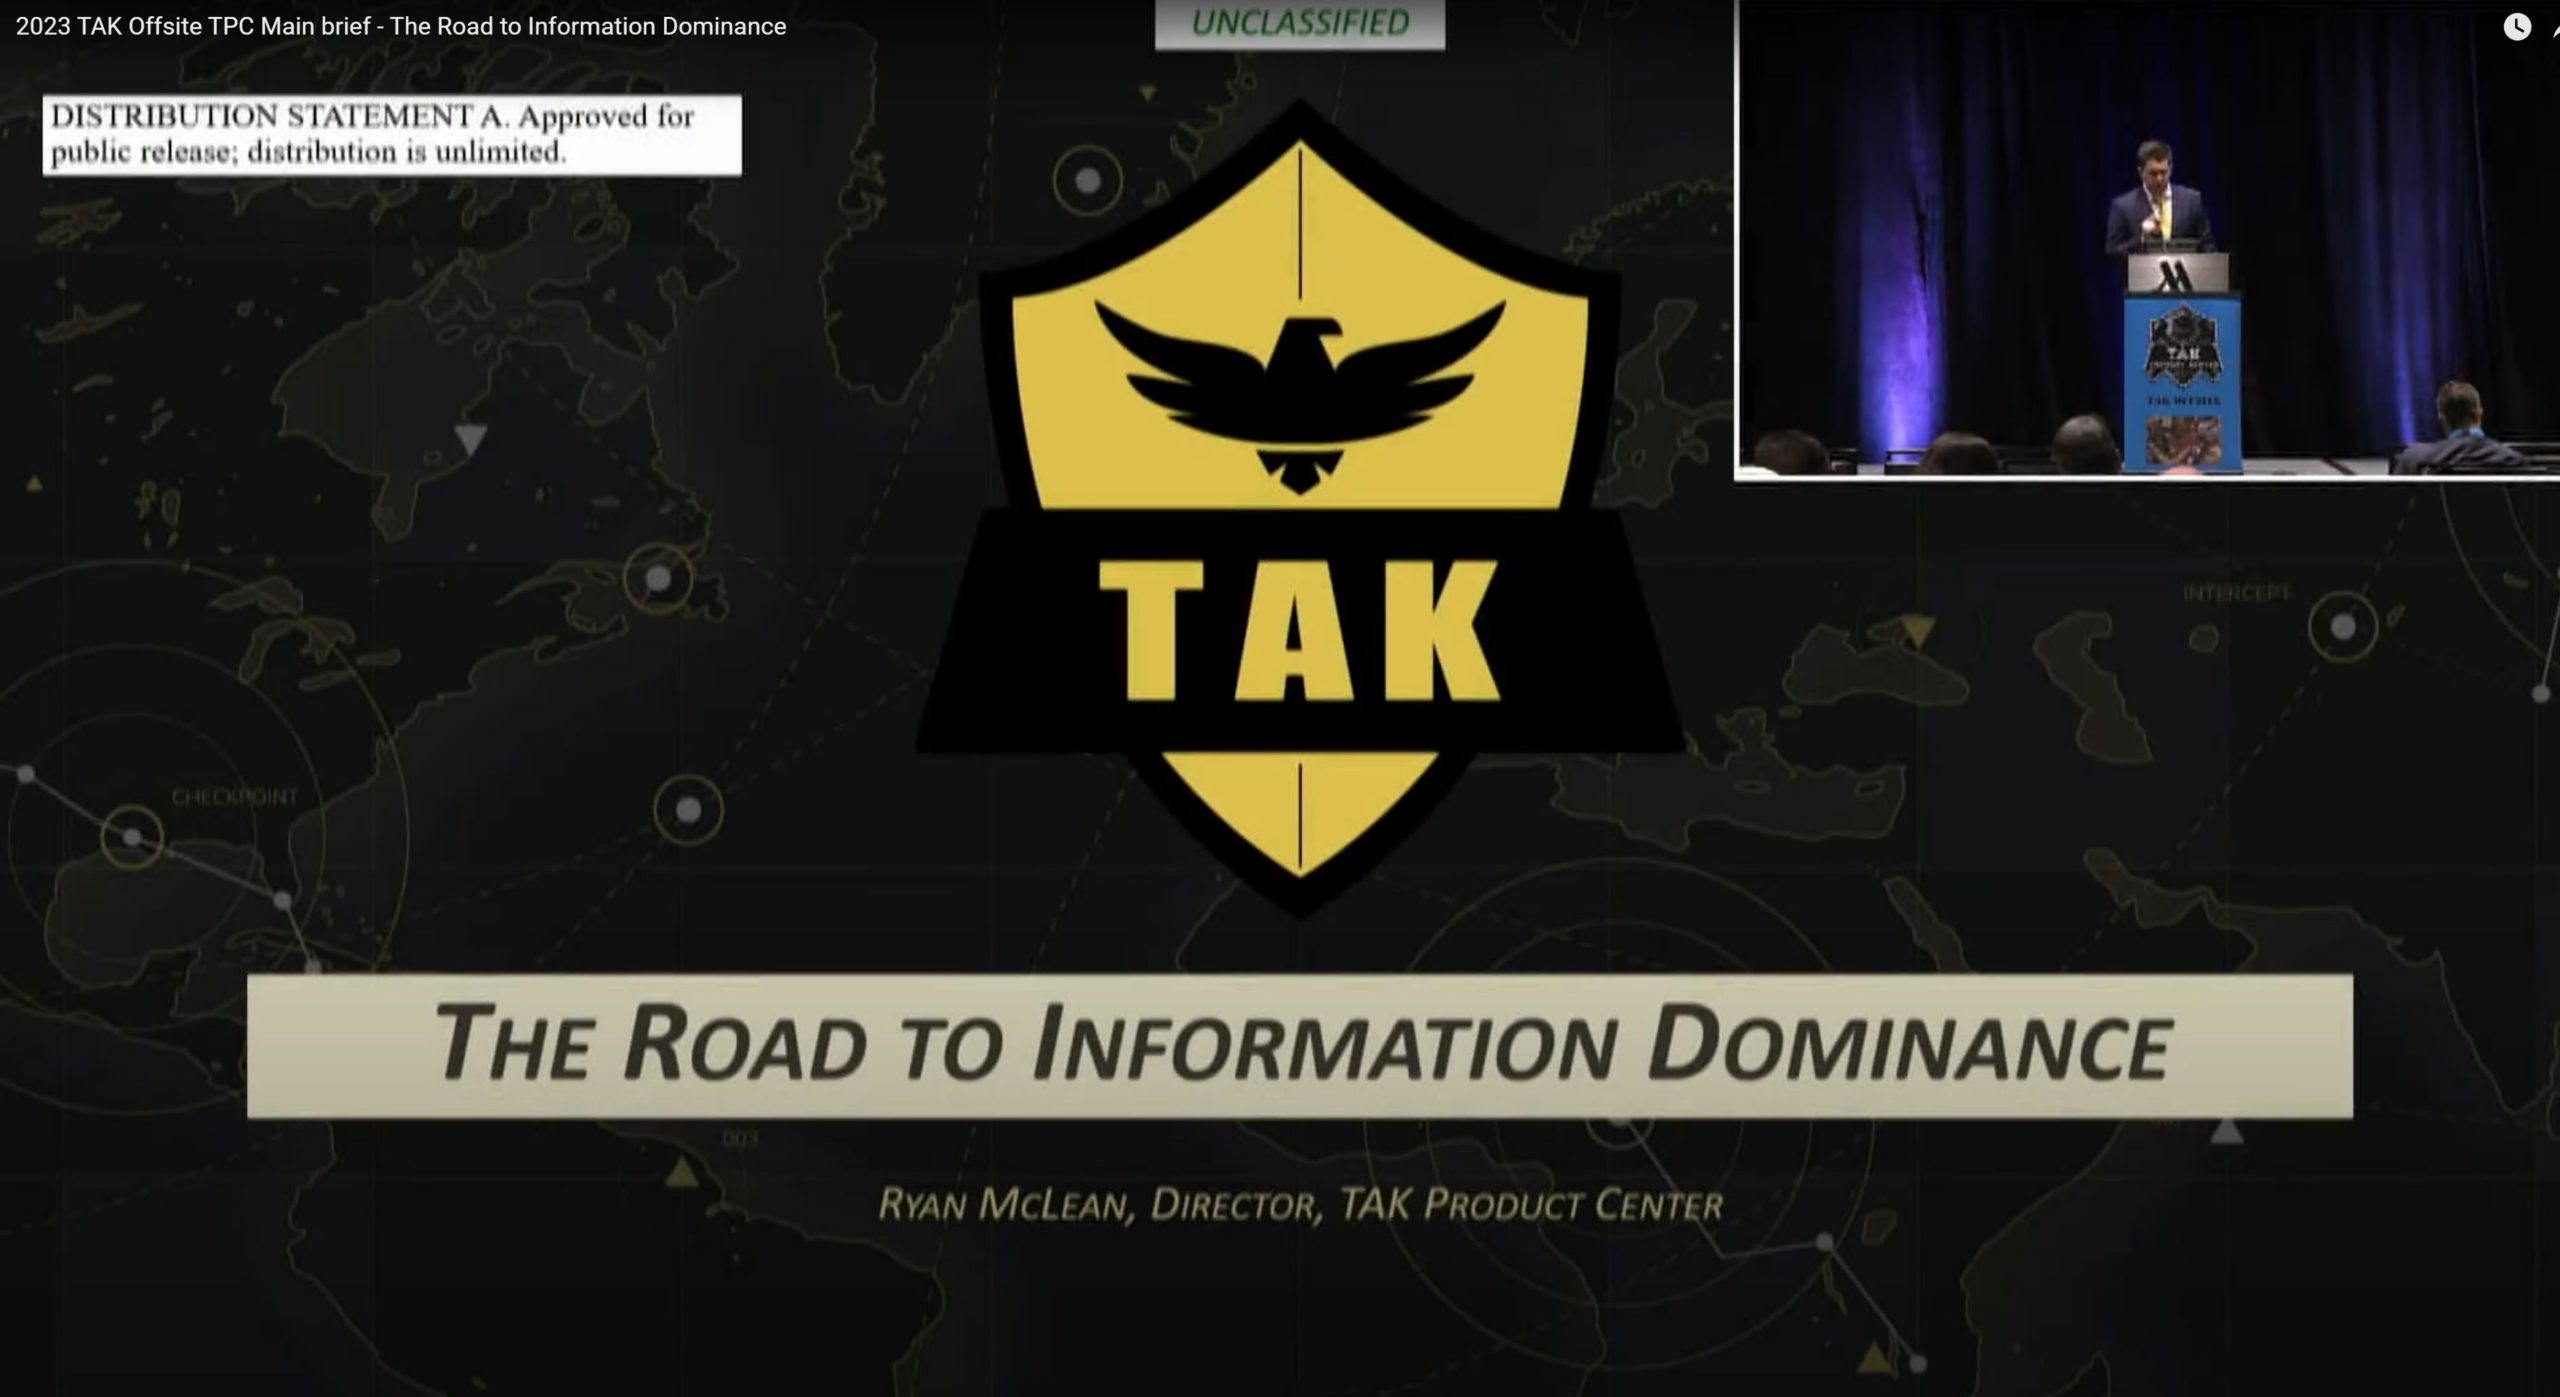 "The Road to Information Dominance" TAK Offsite Directors